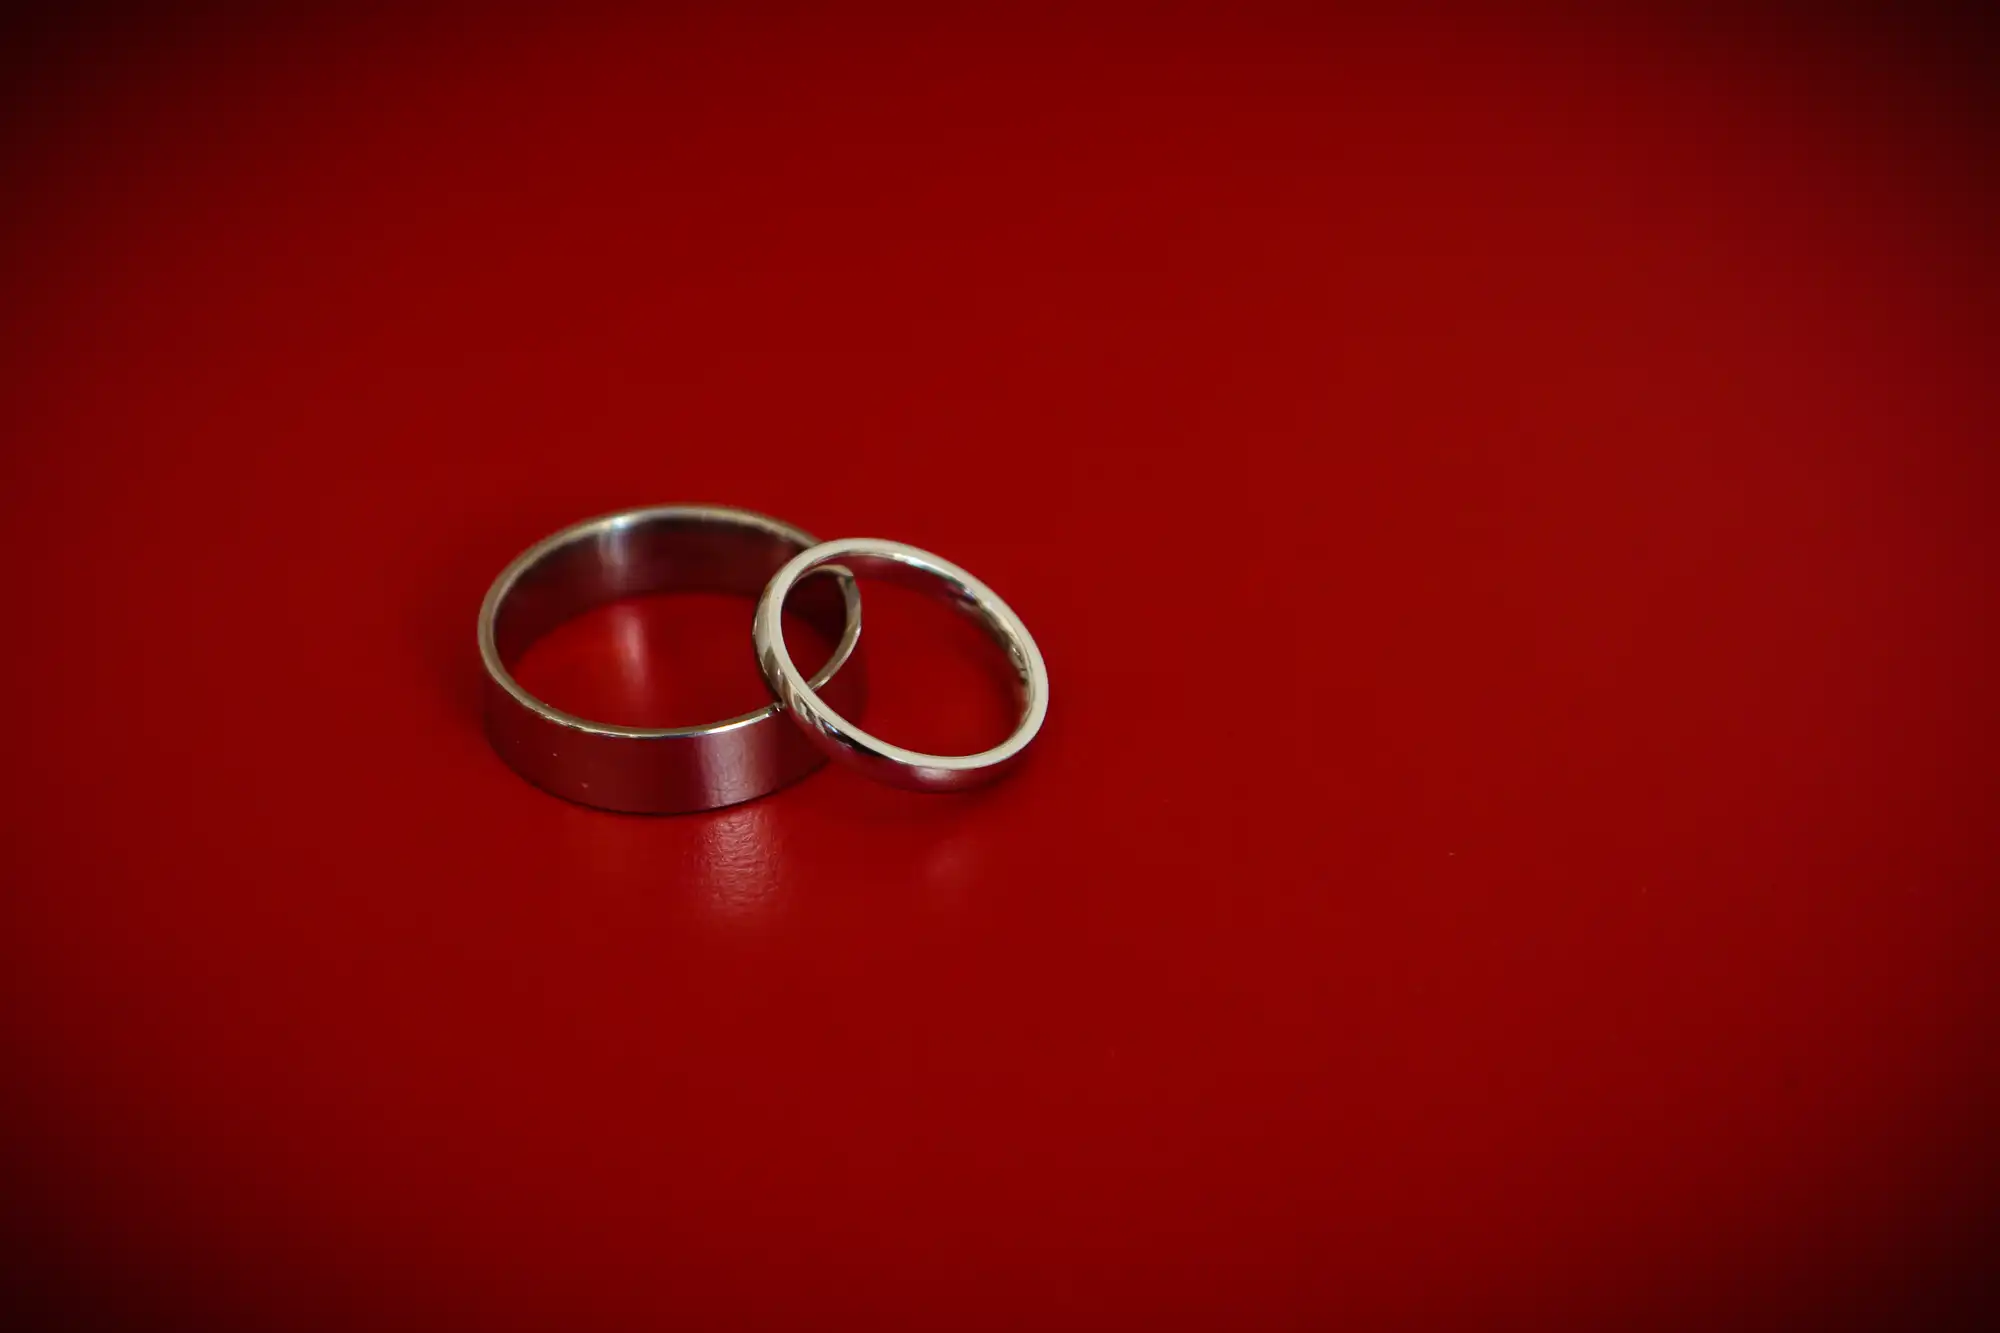 Two silver wedding bands lying on a red background.